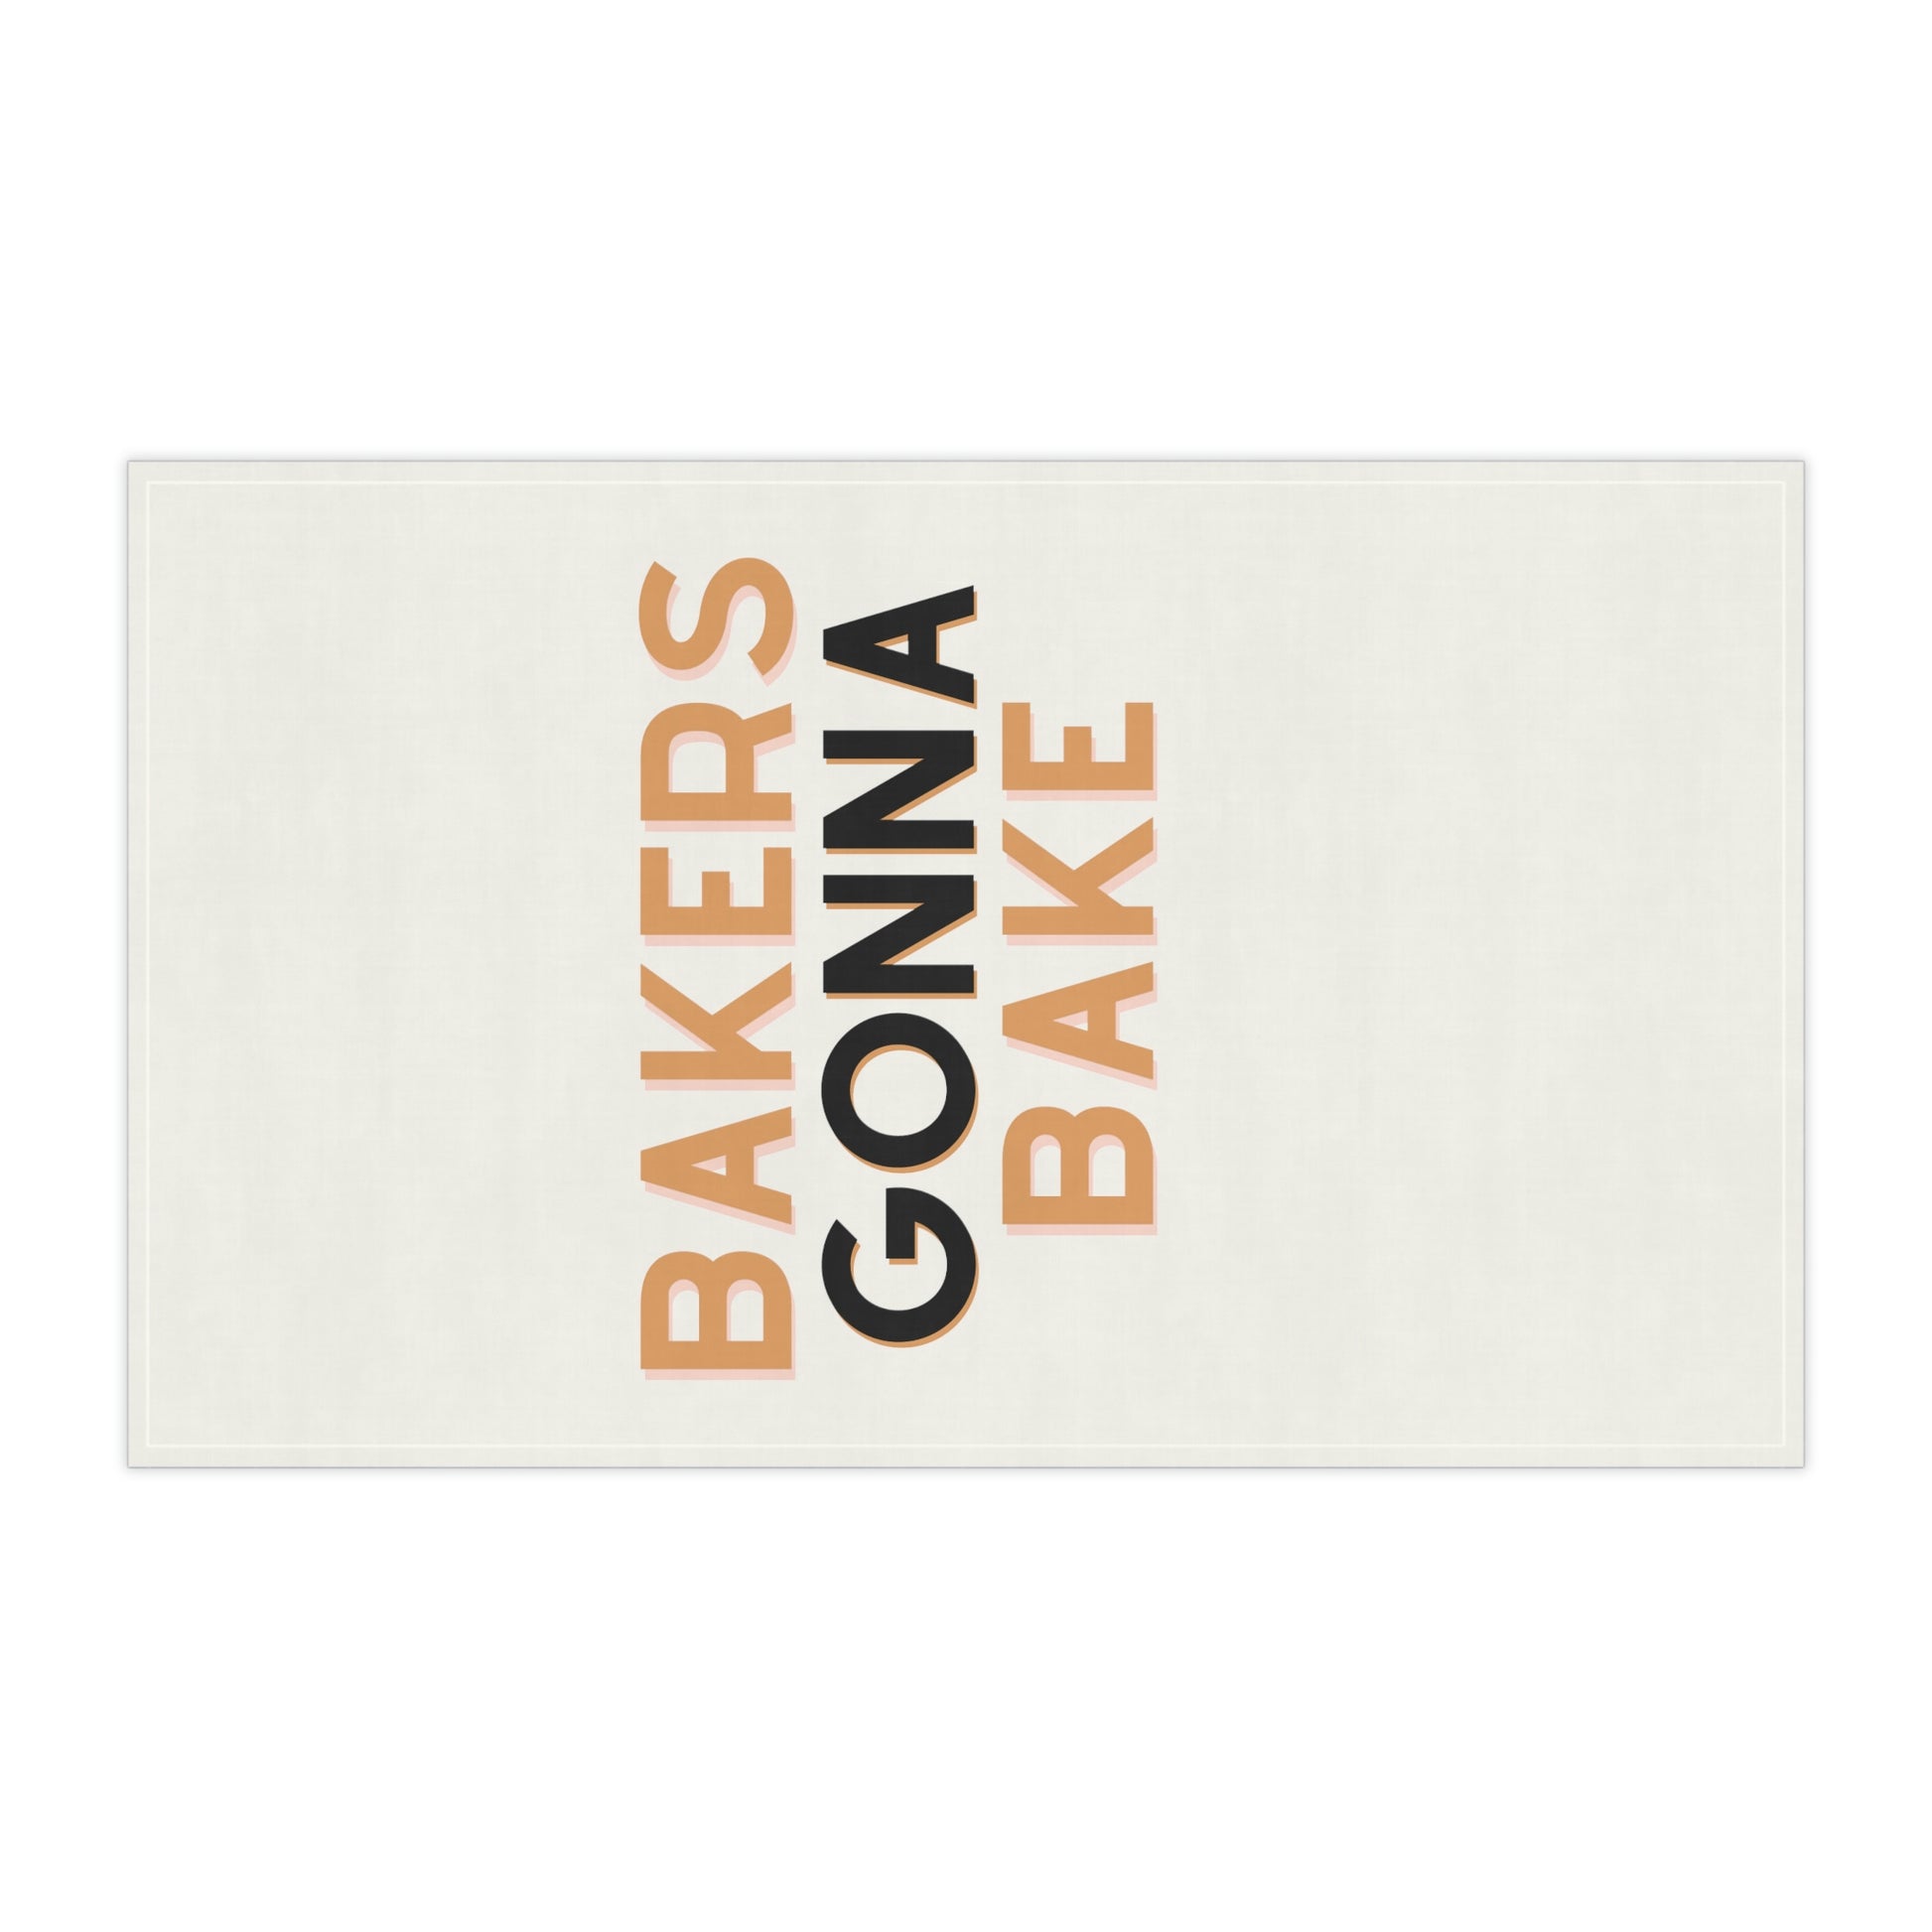 Hanging "Bakers Gonna Bake" kitchen towel in 18" × 30" size.